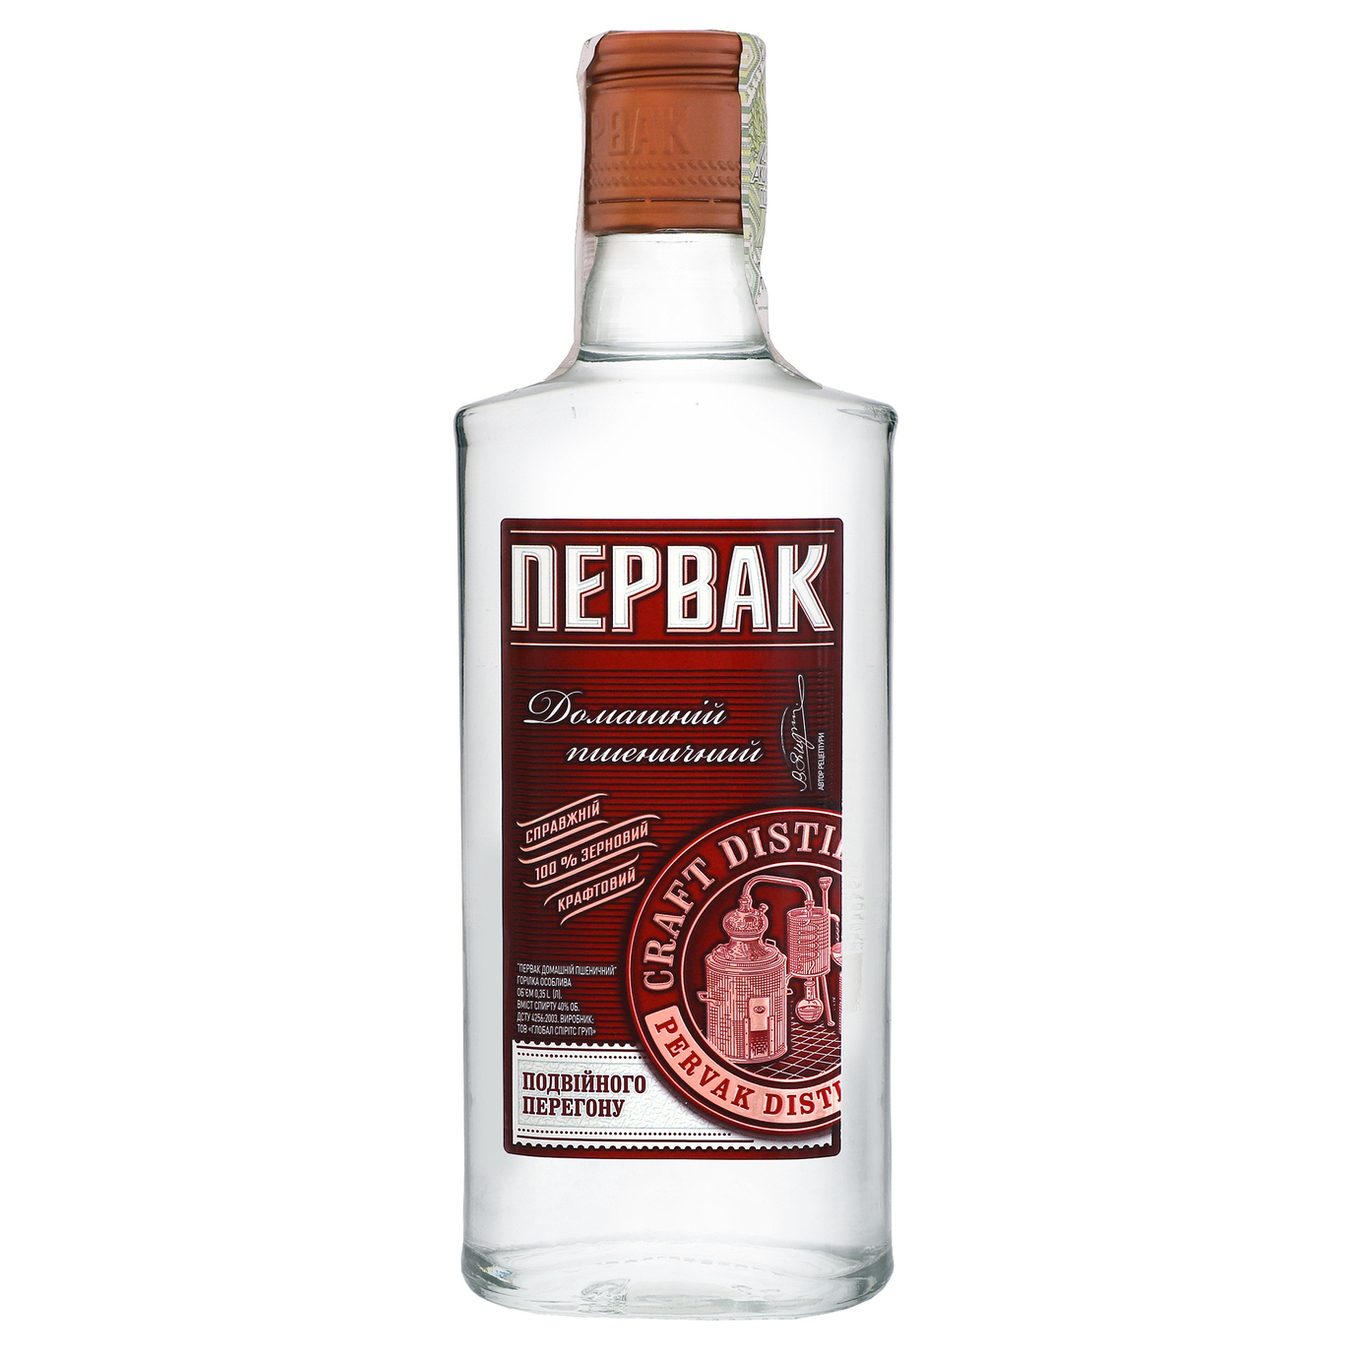 Pervak Homely Wheat special Vodka 40% 0,35l